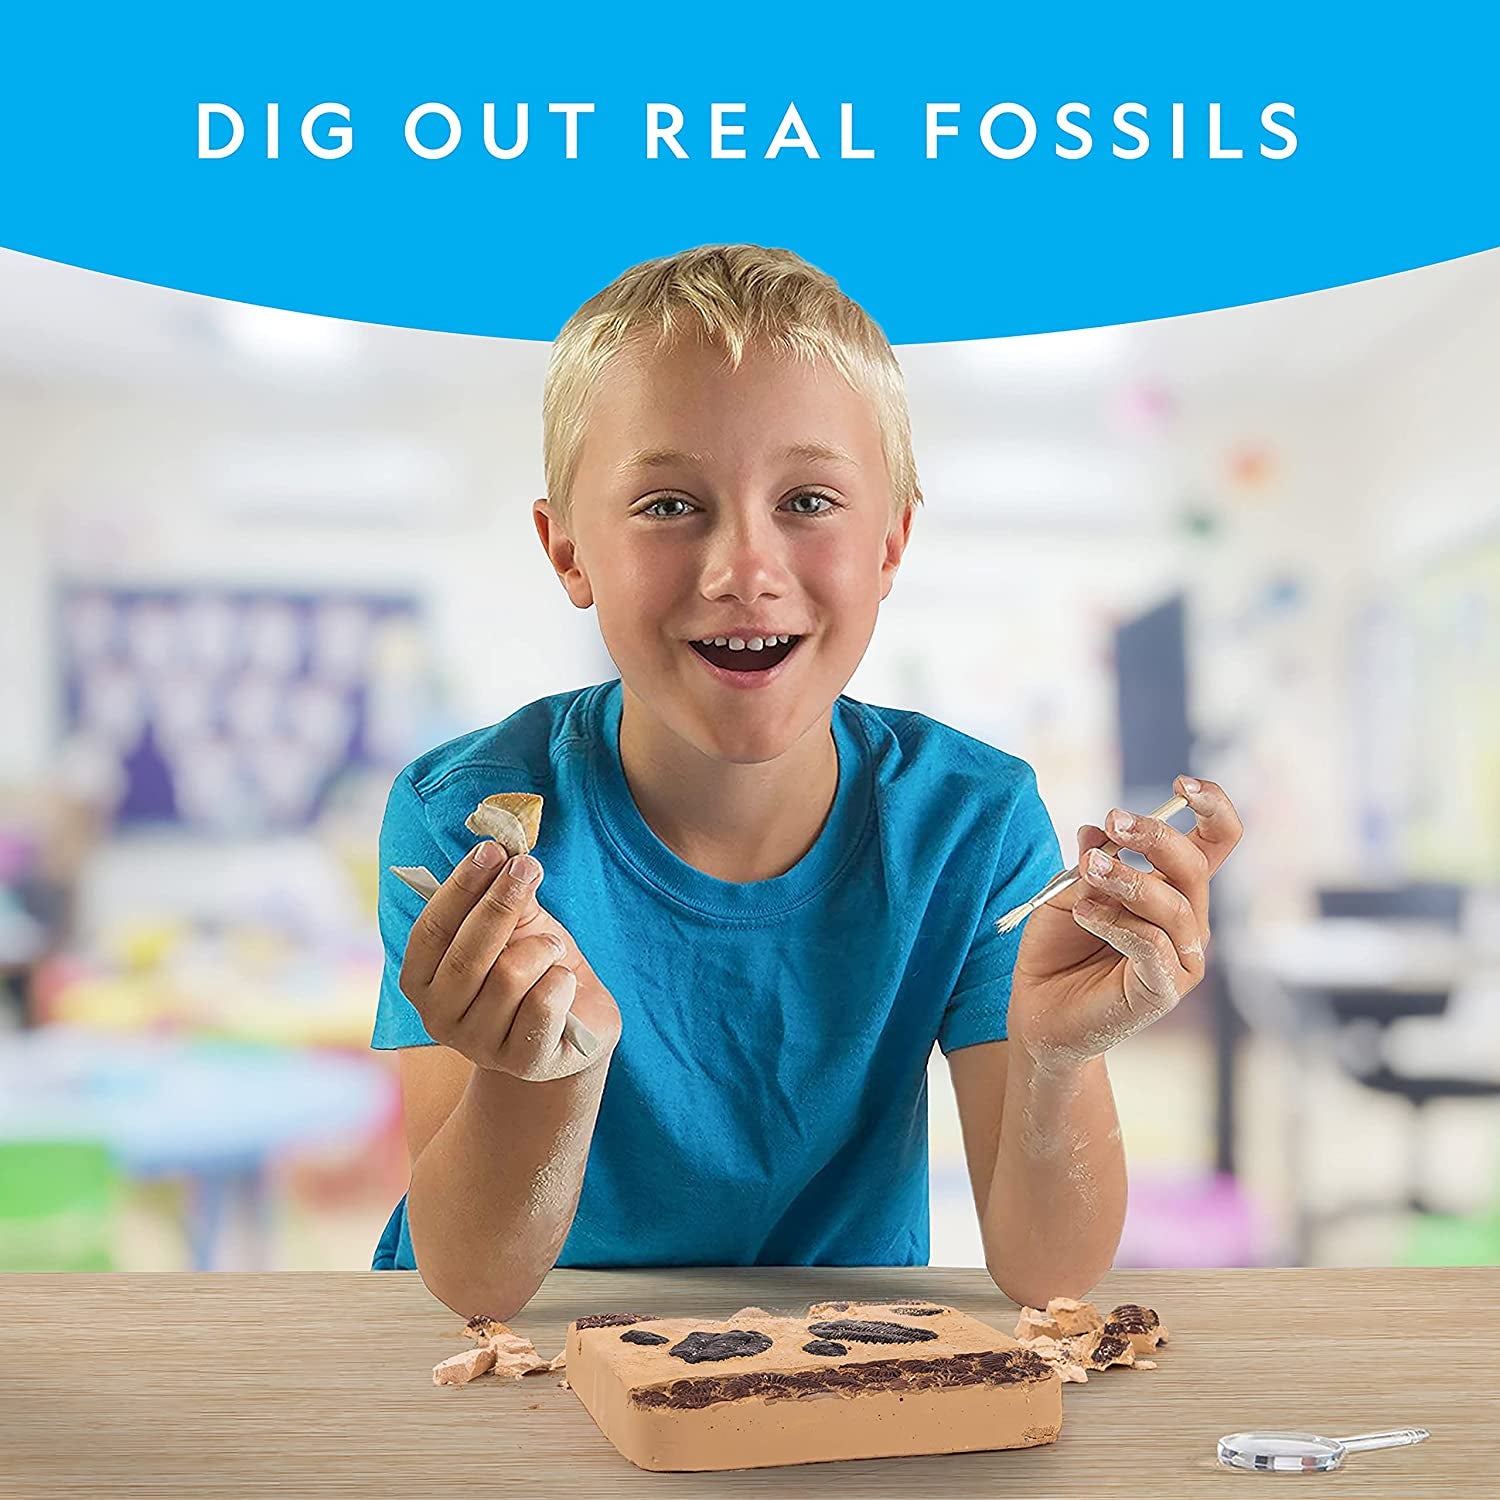 NATIONAL GEOGRAPHIC Mega Fossil Dig Kit - Excavate 15 Prehistoric Fossils Including Dinosaur Bones & Shark Teeth, Educational Toys, Great Science Kit Gift for Girls and Boys (Amazon Exclusive)